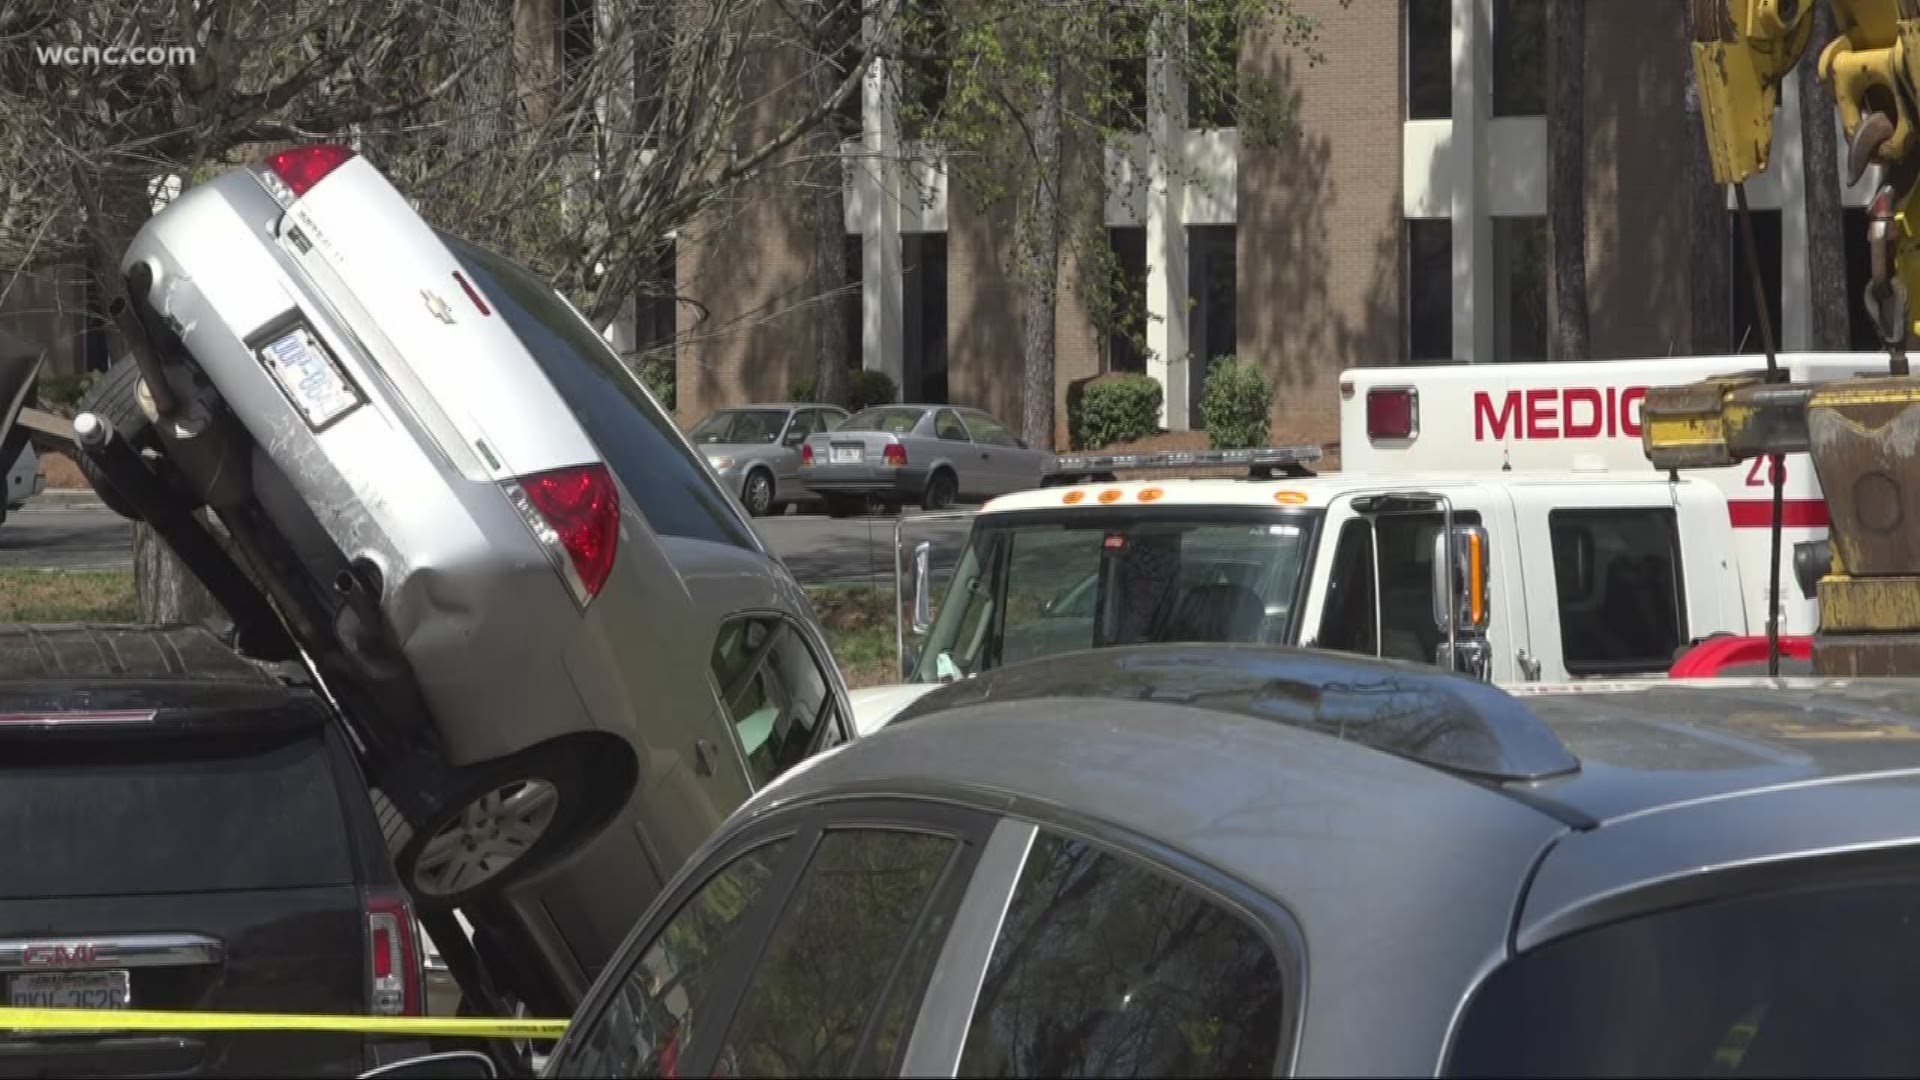 In the video, you can see the ambulance lunge forward and push two cars into other vehicles in a parking lot.